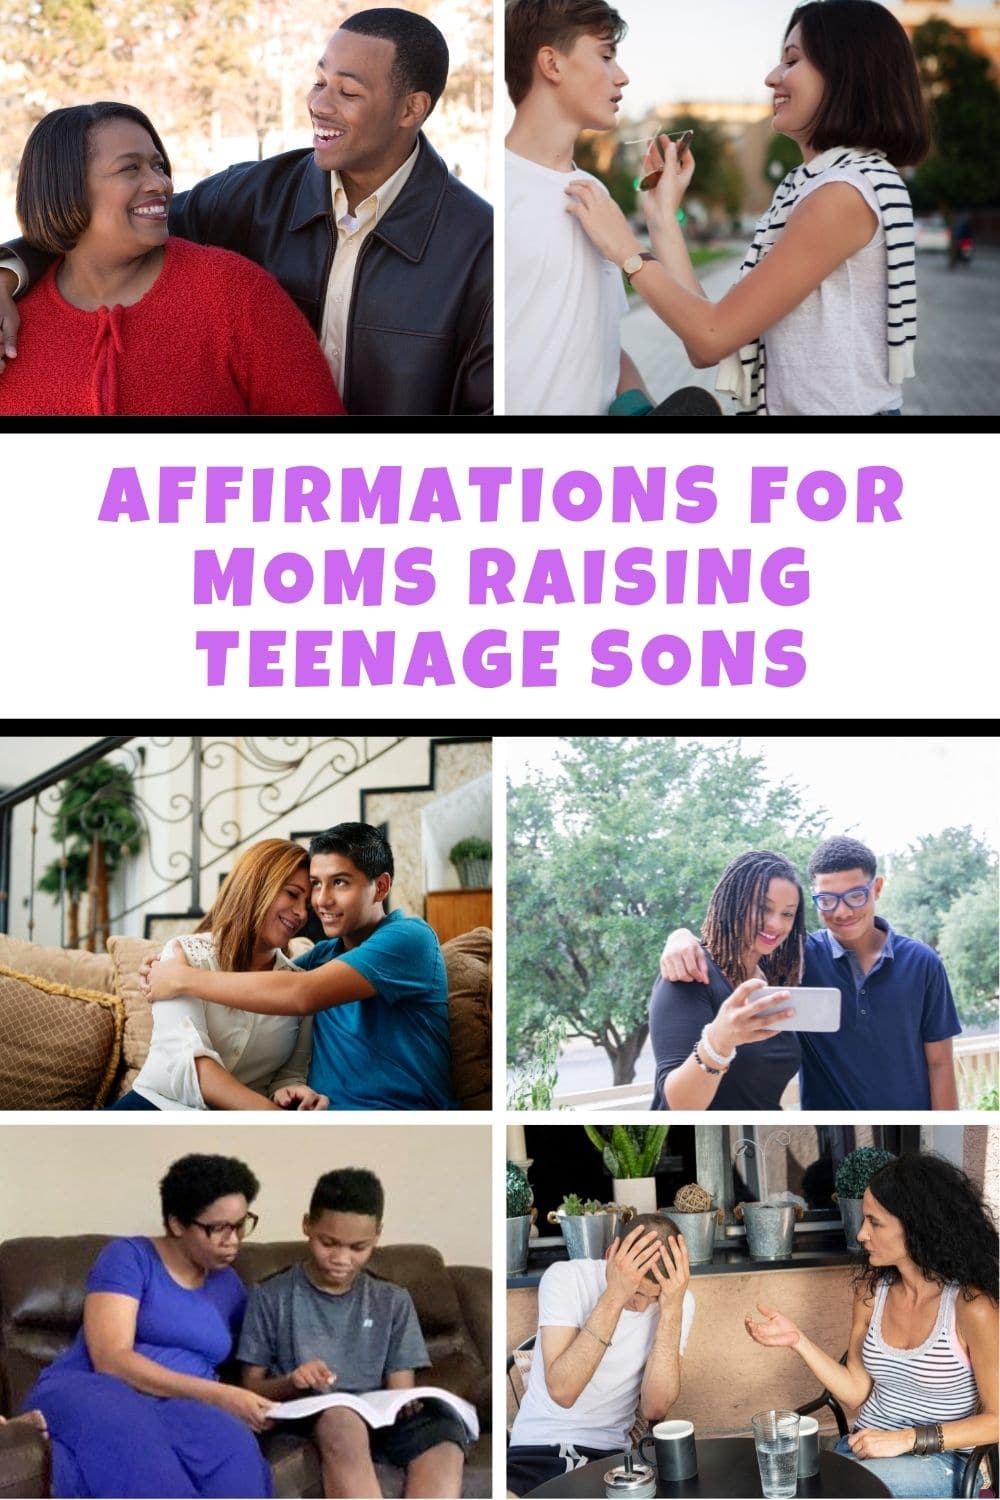 Affirmations for Moms Raising Teenage Sons